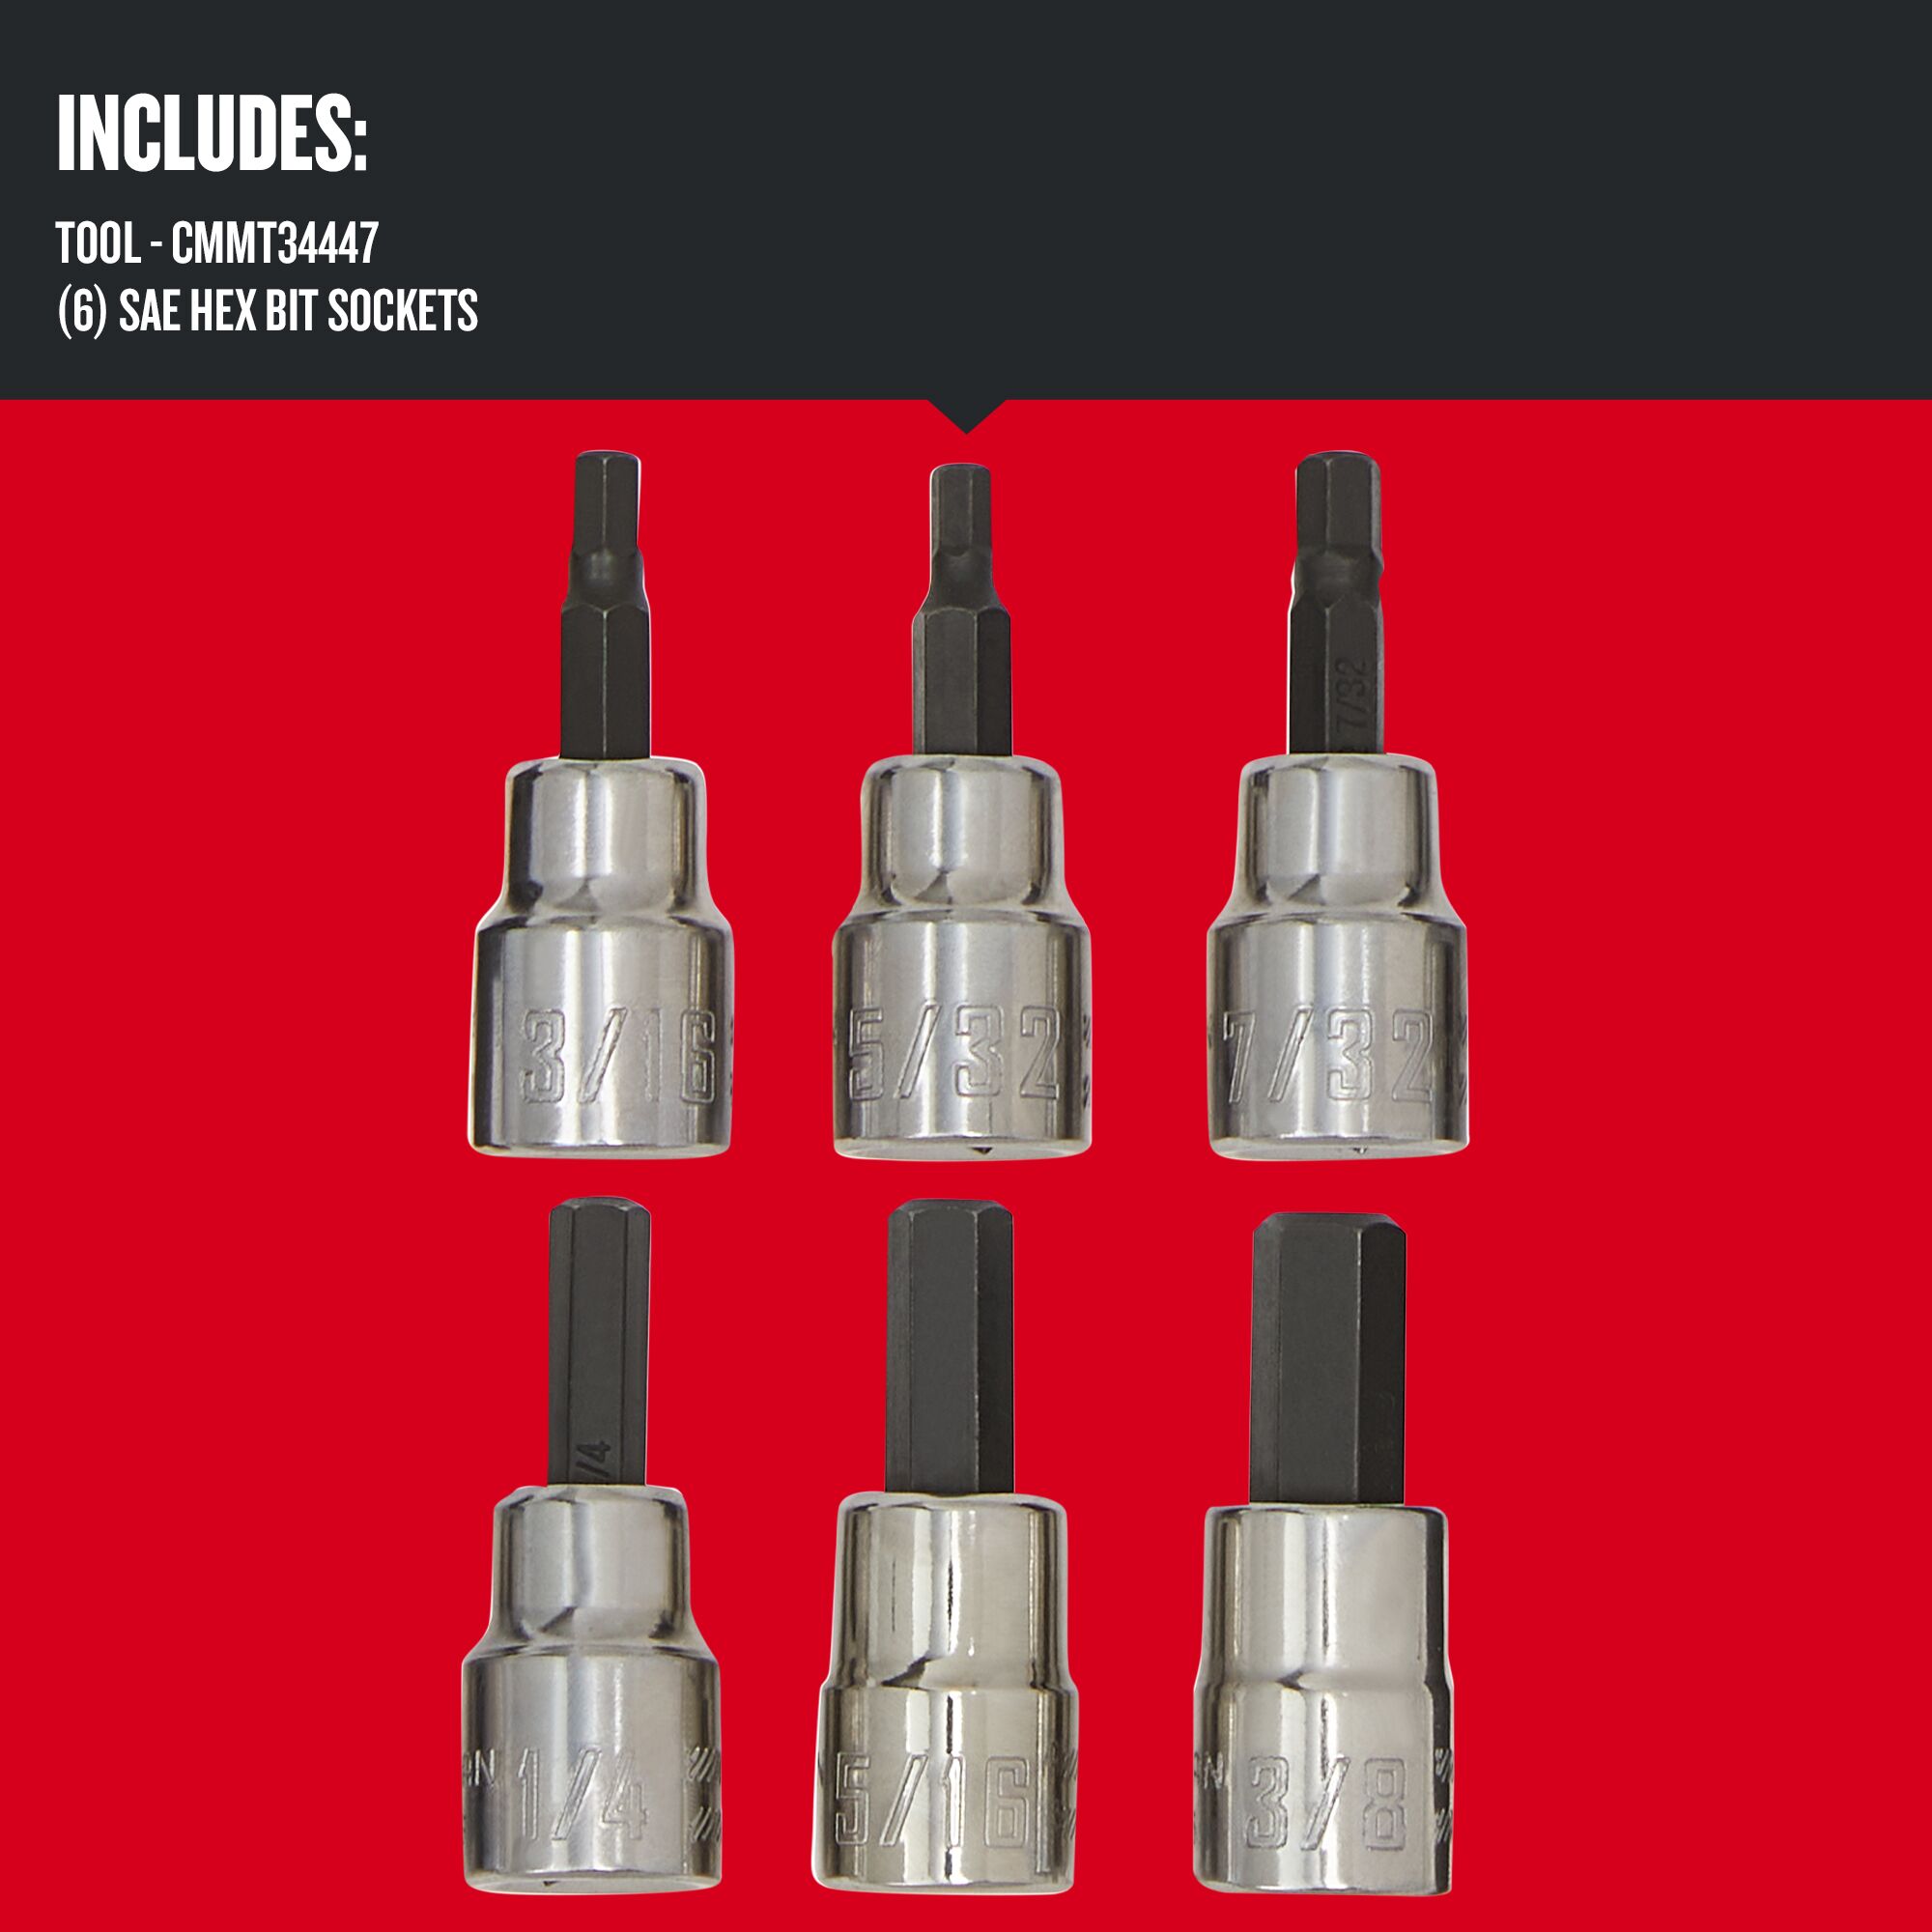 Front view of Craftsman SAE Hex Bit Socket 6 pc. showing six SAE Hex bit sockets.